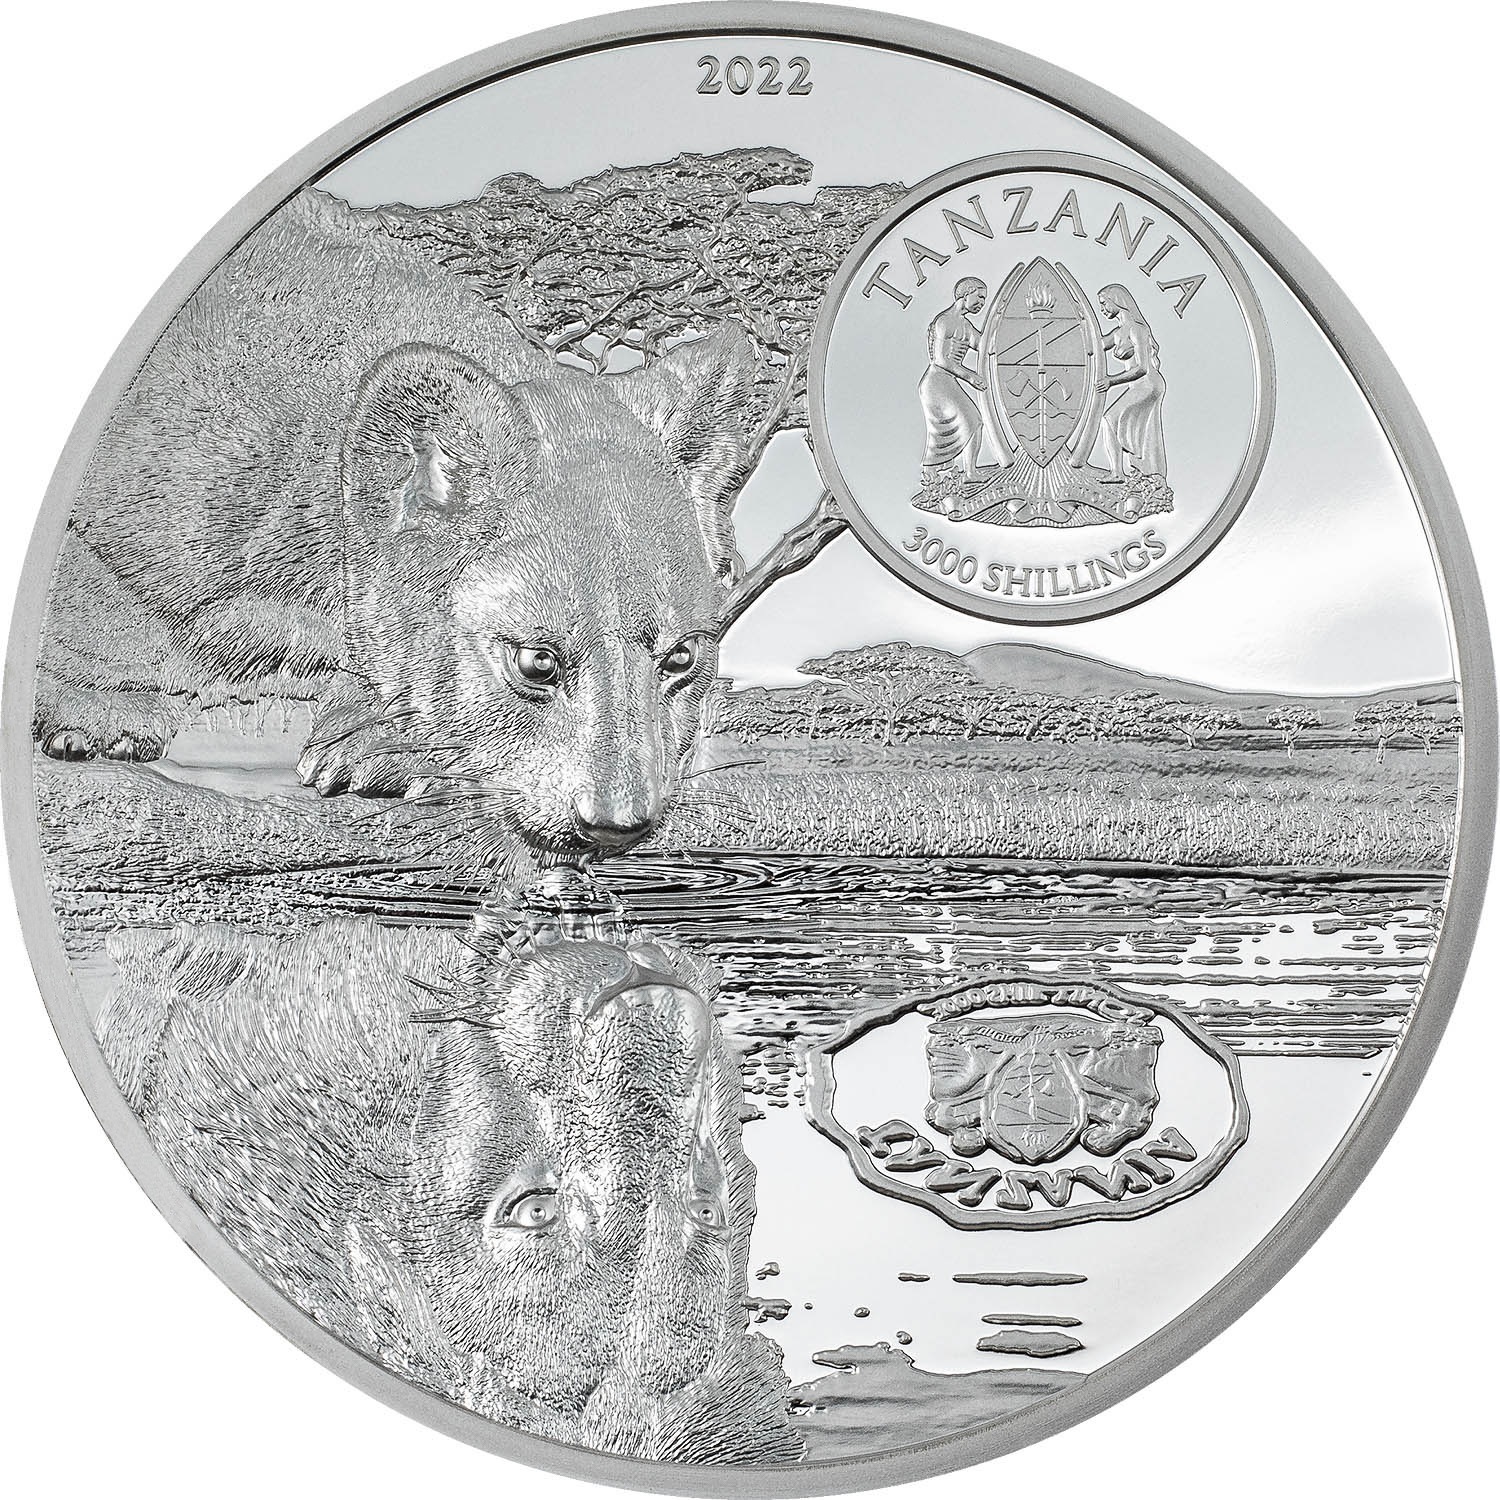 (W215.3000.S.2022.1) Tanzania 3000 Shillings Lions 2022 - Black Proof silver Obverse (zoom)